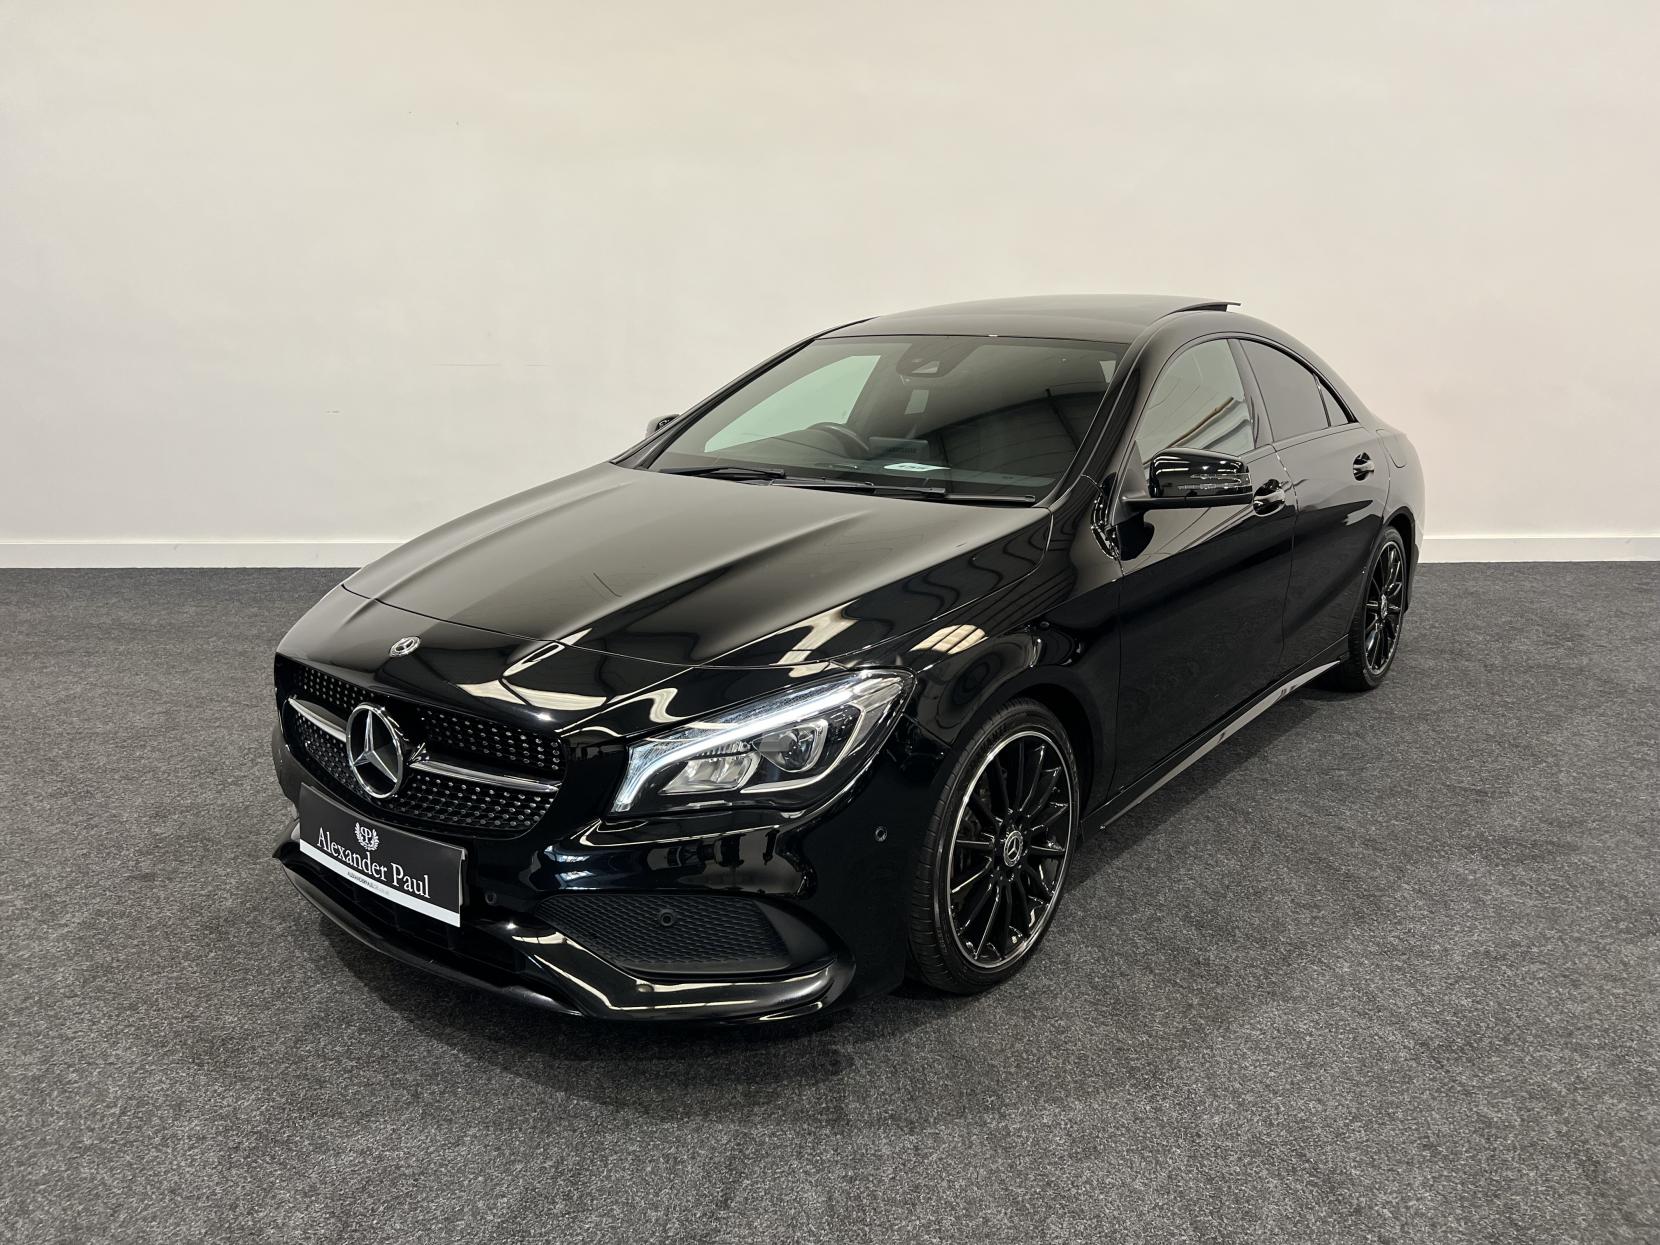 Mercedes-Benz CLA Class 2.1 CLA220d AMG Line Night Edition (Plus) Coupe 4dr Diesel 7G-DCT Euro 6 (s/s) (170 ps)